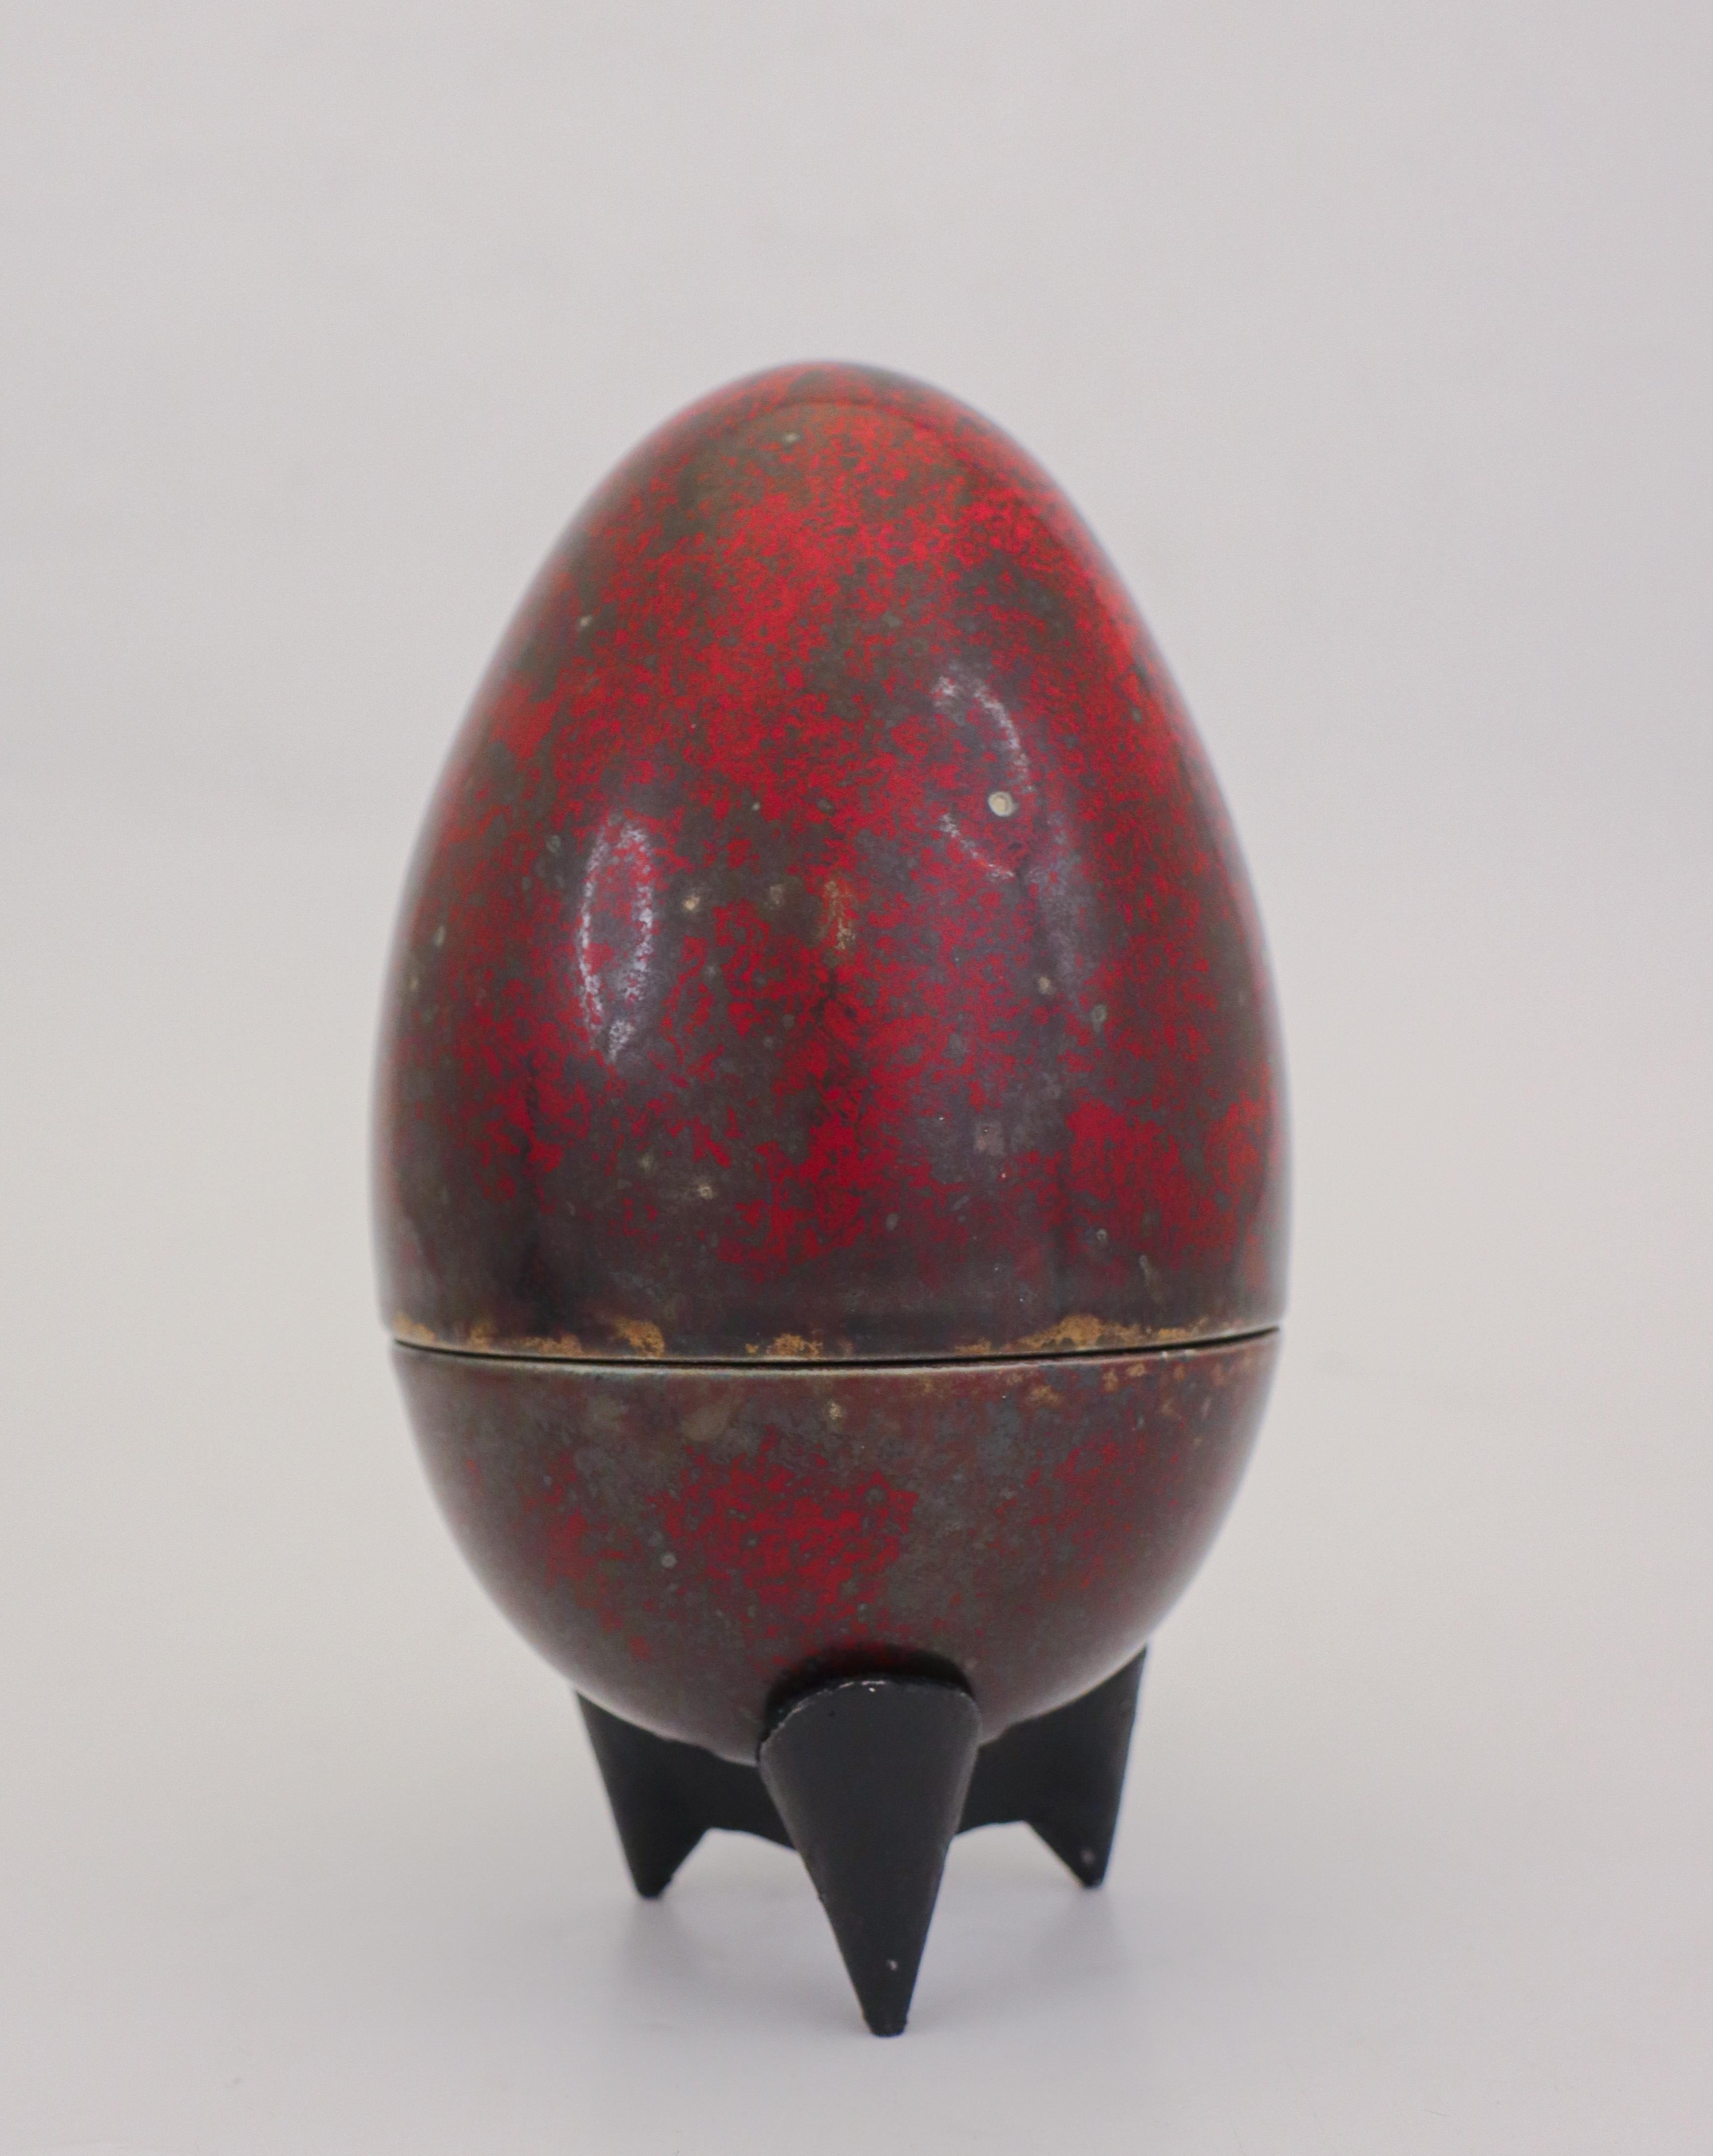 Glazed A Red Stoneware Egg Sculpture by Hans Hedberg, Biot, France